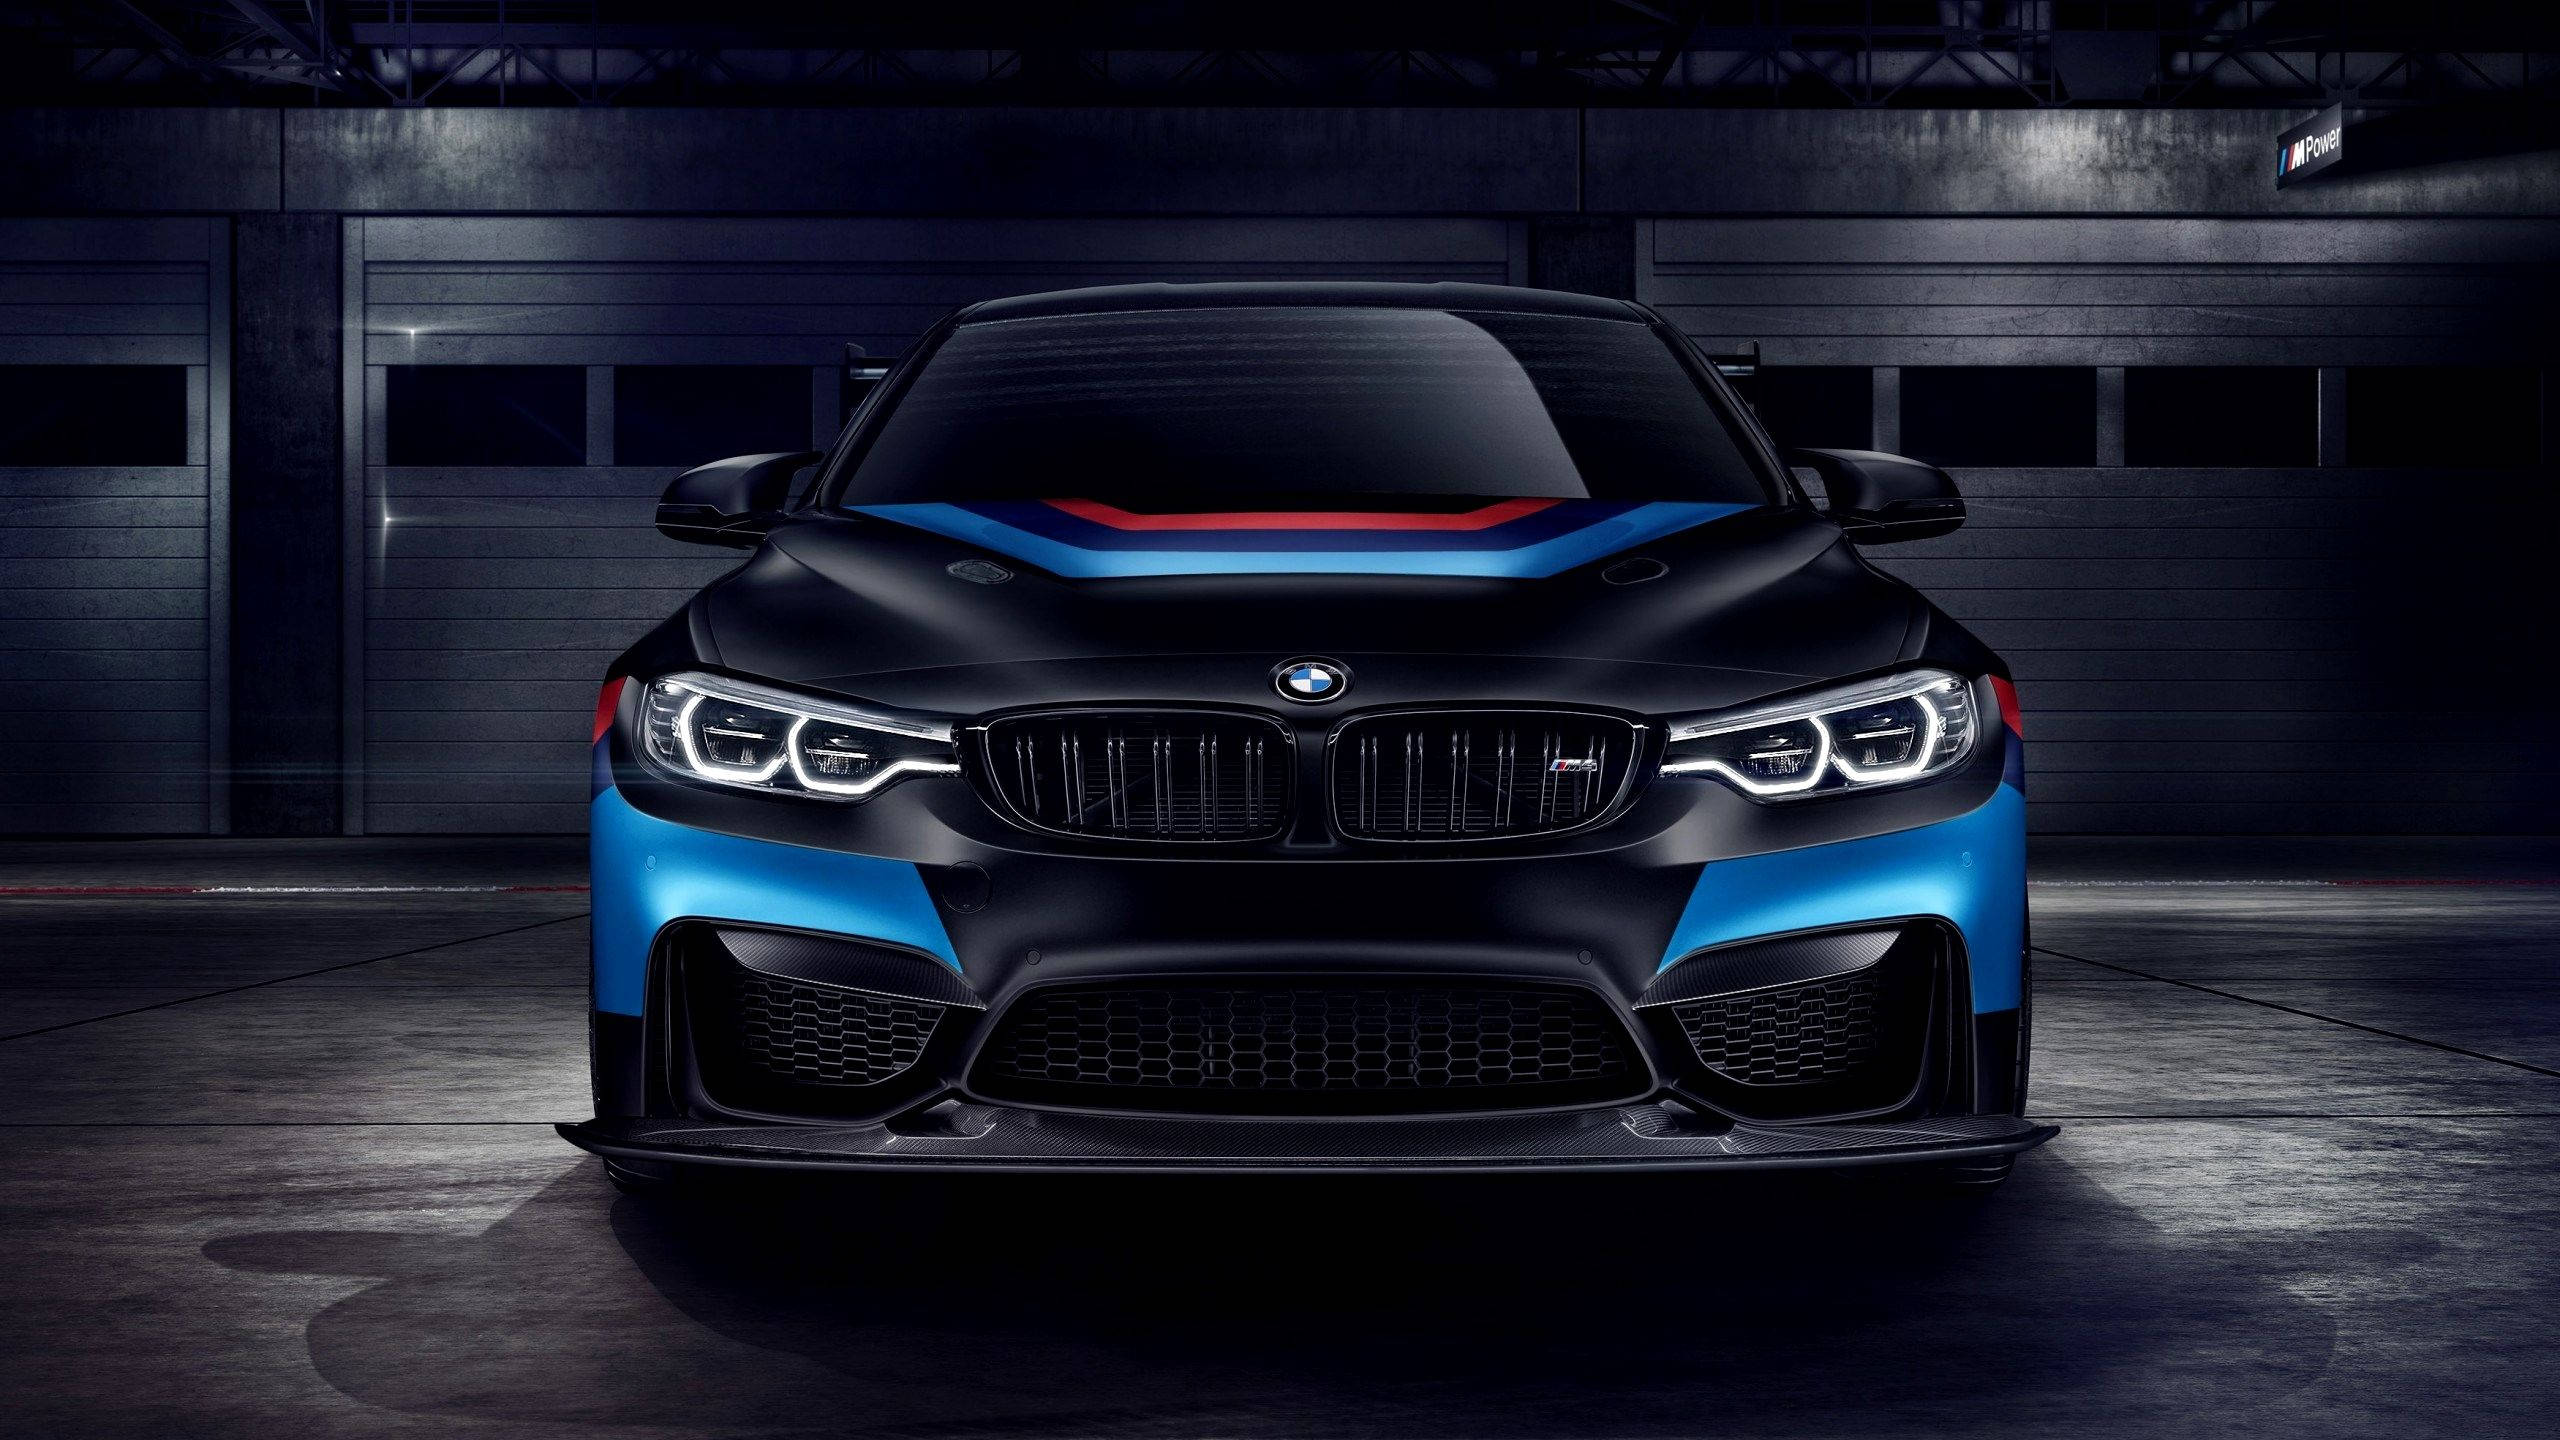 2560x1440 Car Blue And Black Bmw Picture